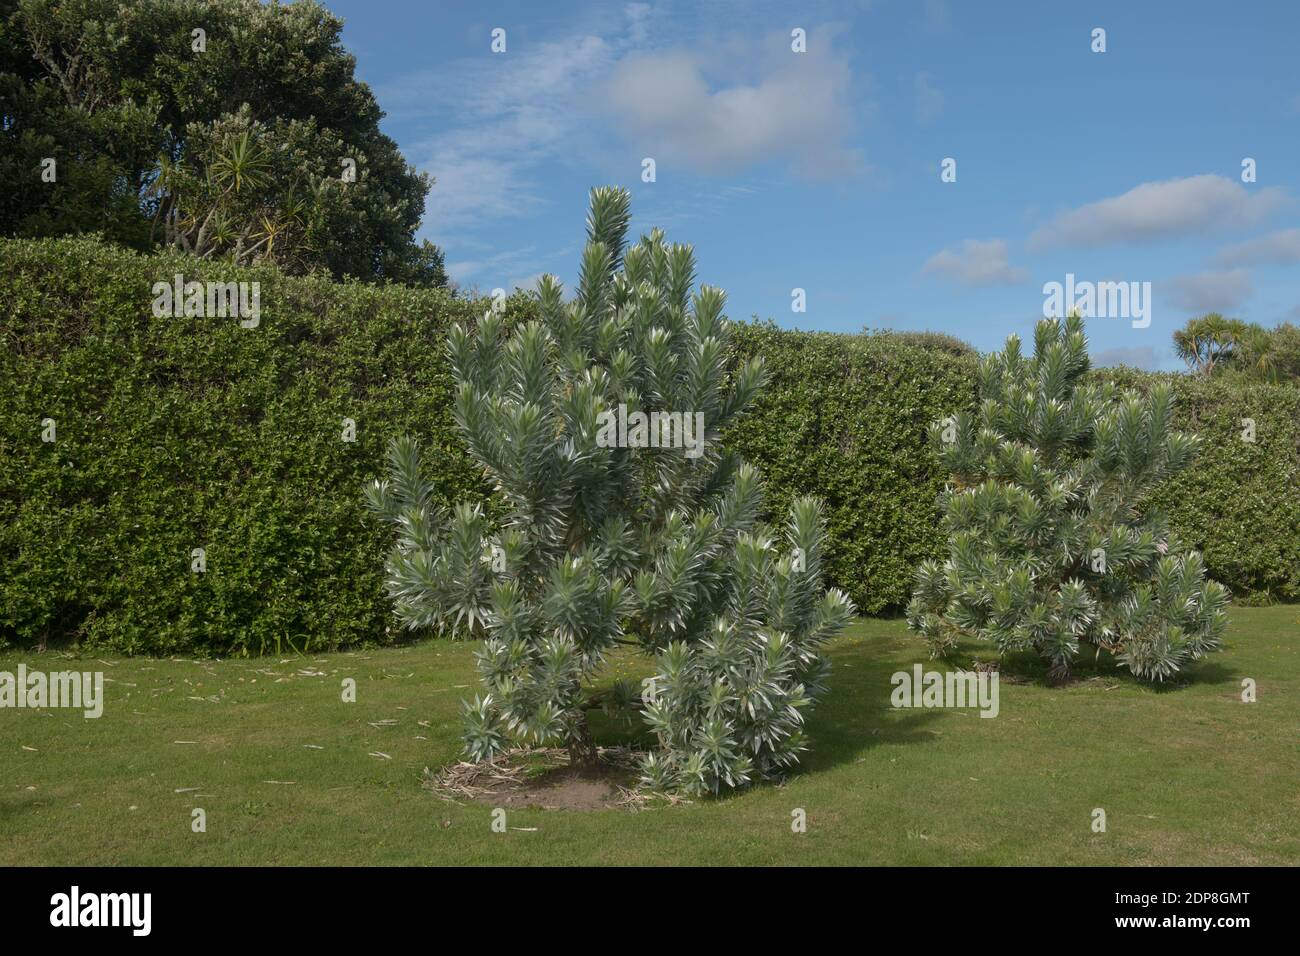 Green Foliage of a South African Pine or Silver Tree (Leucadendron argenteum) Growing in a Garden on the Island of Tresco in the Isles of Scilly Stock Photo